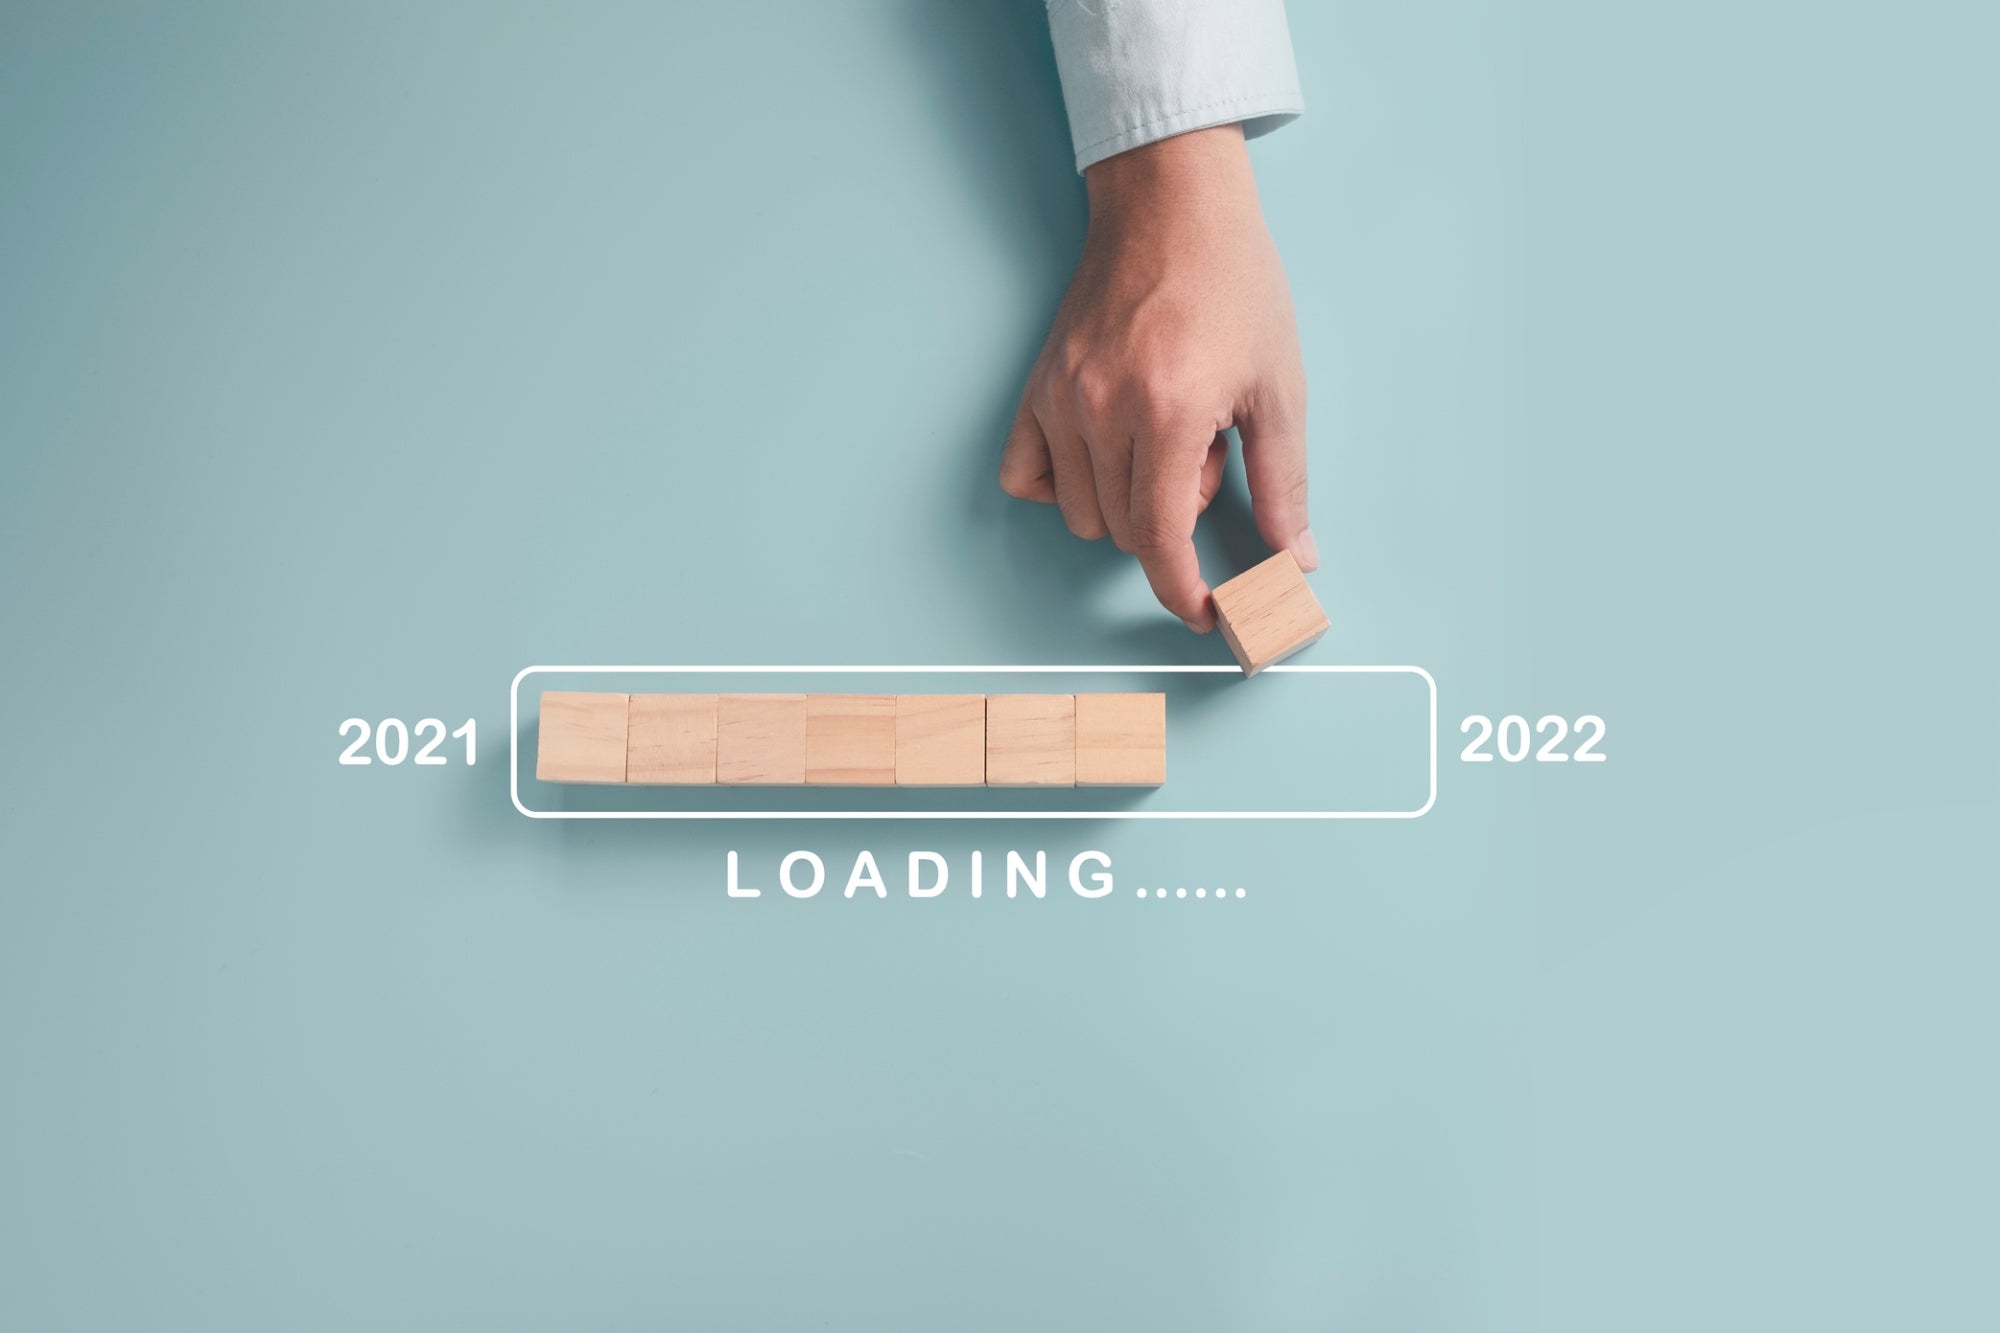 Marketing in 2022 (or is it 2020, too?)